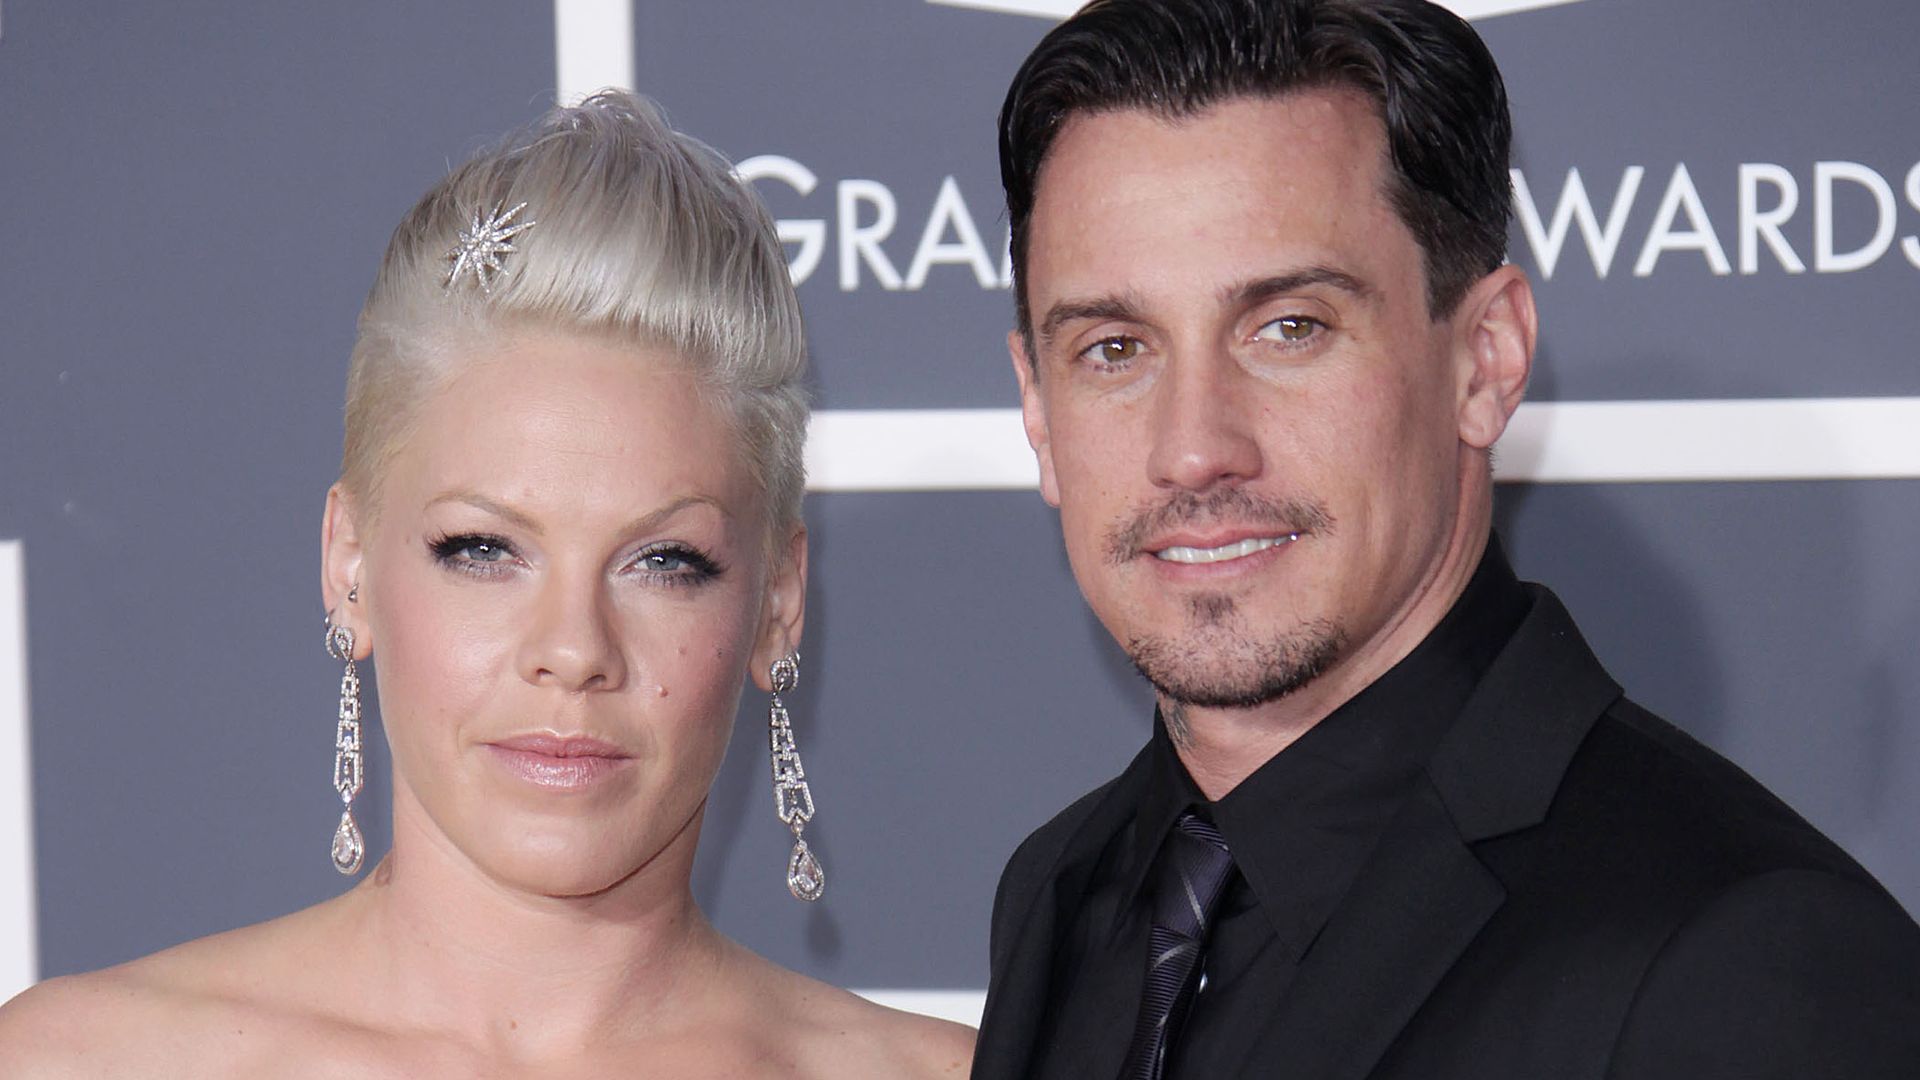 Pink in a silver dress with her husband Carey Hart in a black suit